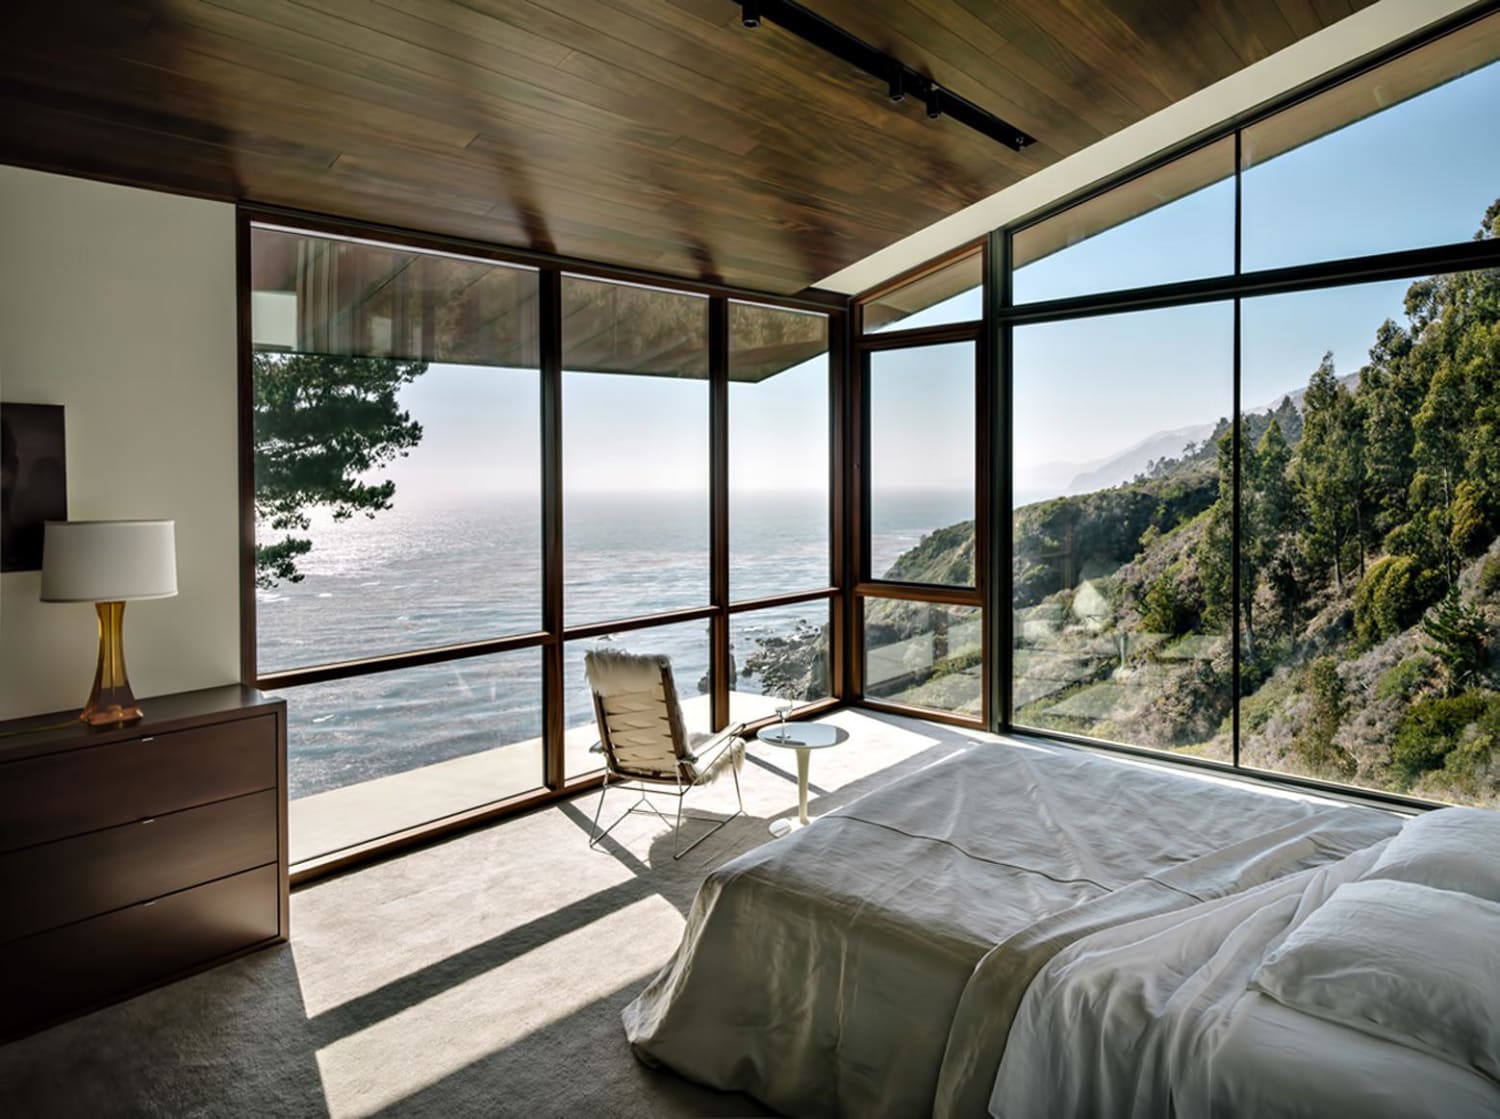 Bedroom with a west coast view - Big Sur, California